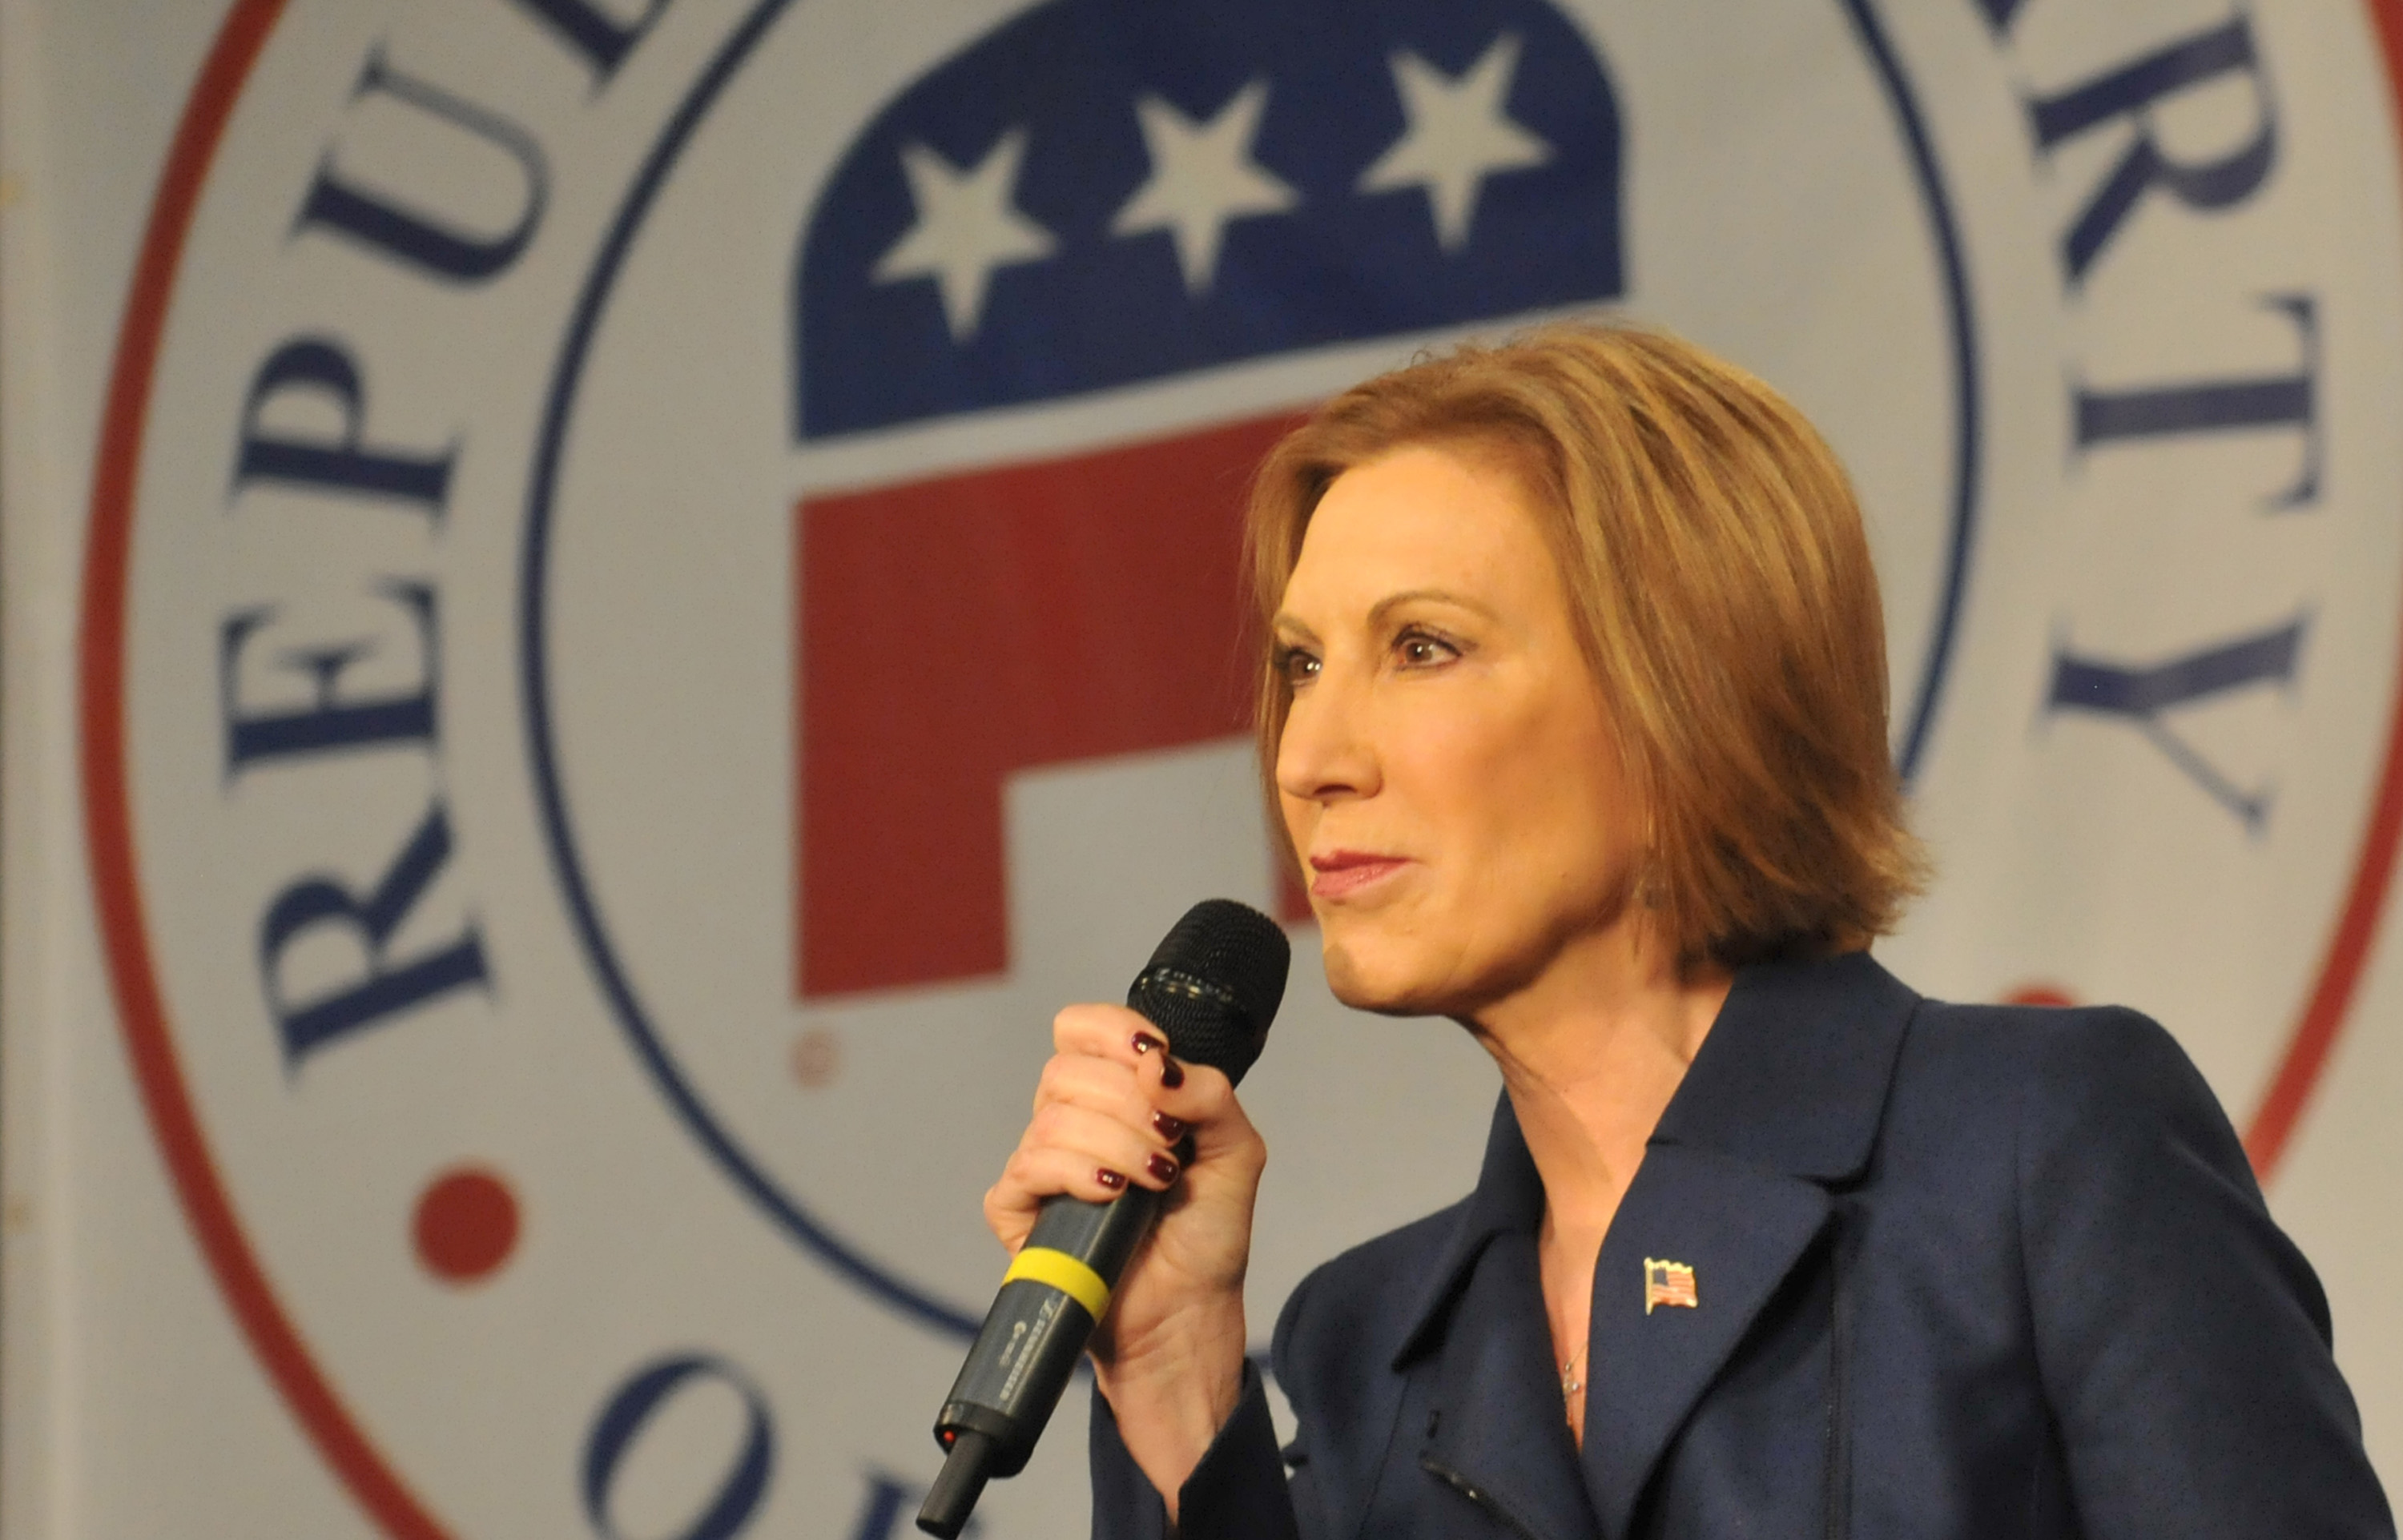 Republican presidential candidate Carly Fiorina speaks at the Growth and Opportunity Party, at the Iowa State Fair in Des Moines, Iowa, on Oct. 31, 2015. (Steve Pope—Getty Images)